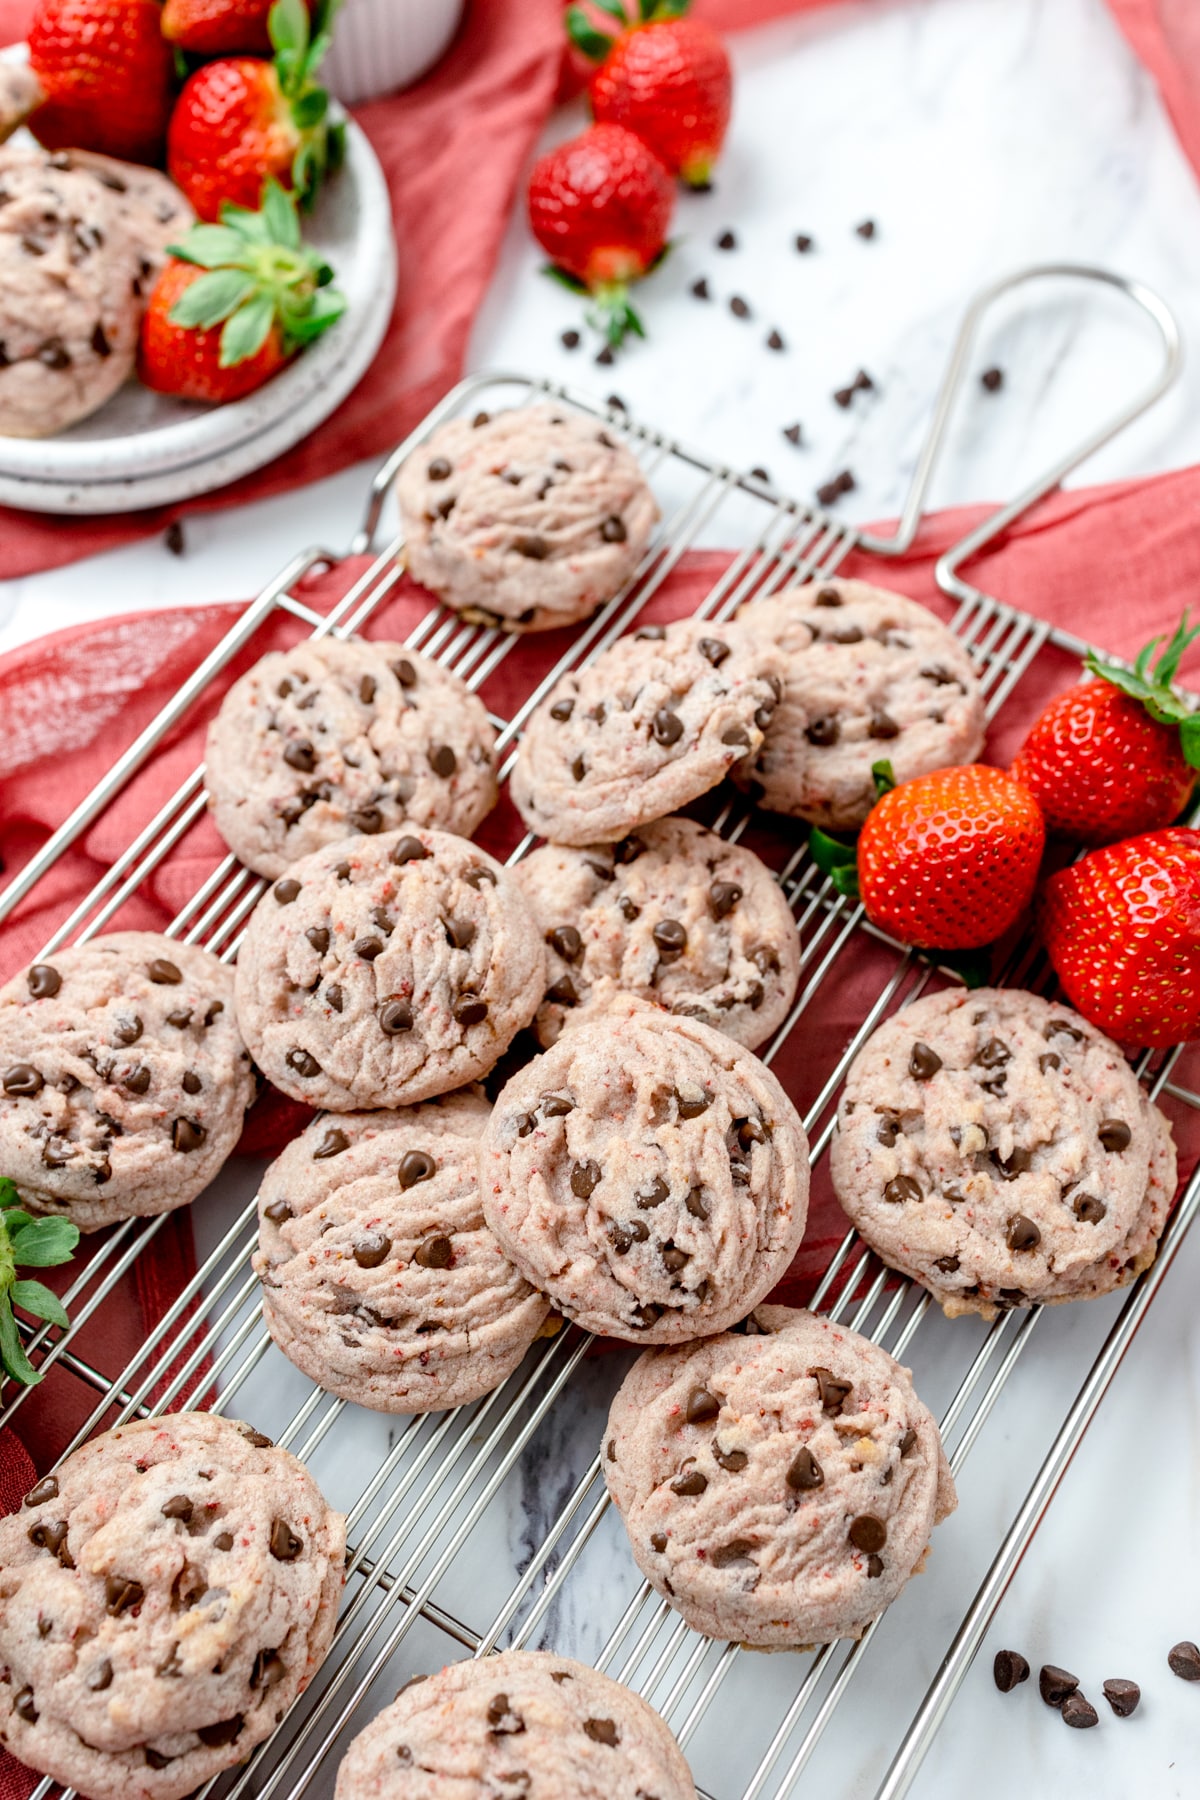 Top view of strawberry chocolate chip cookies scattered on a table with strawberries next to them.